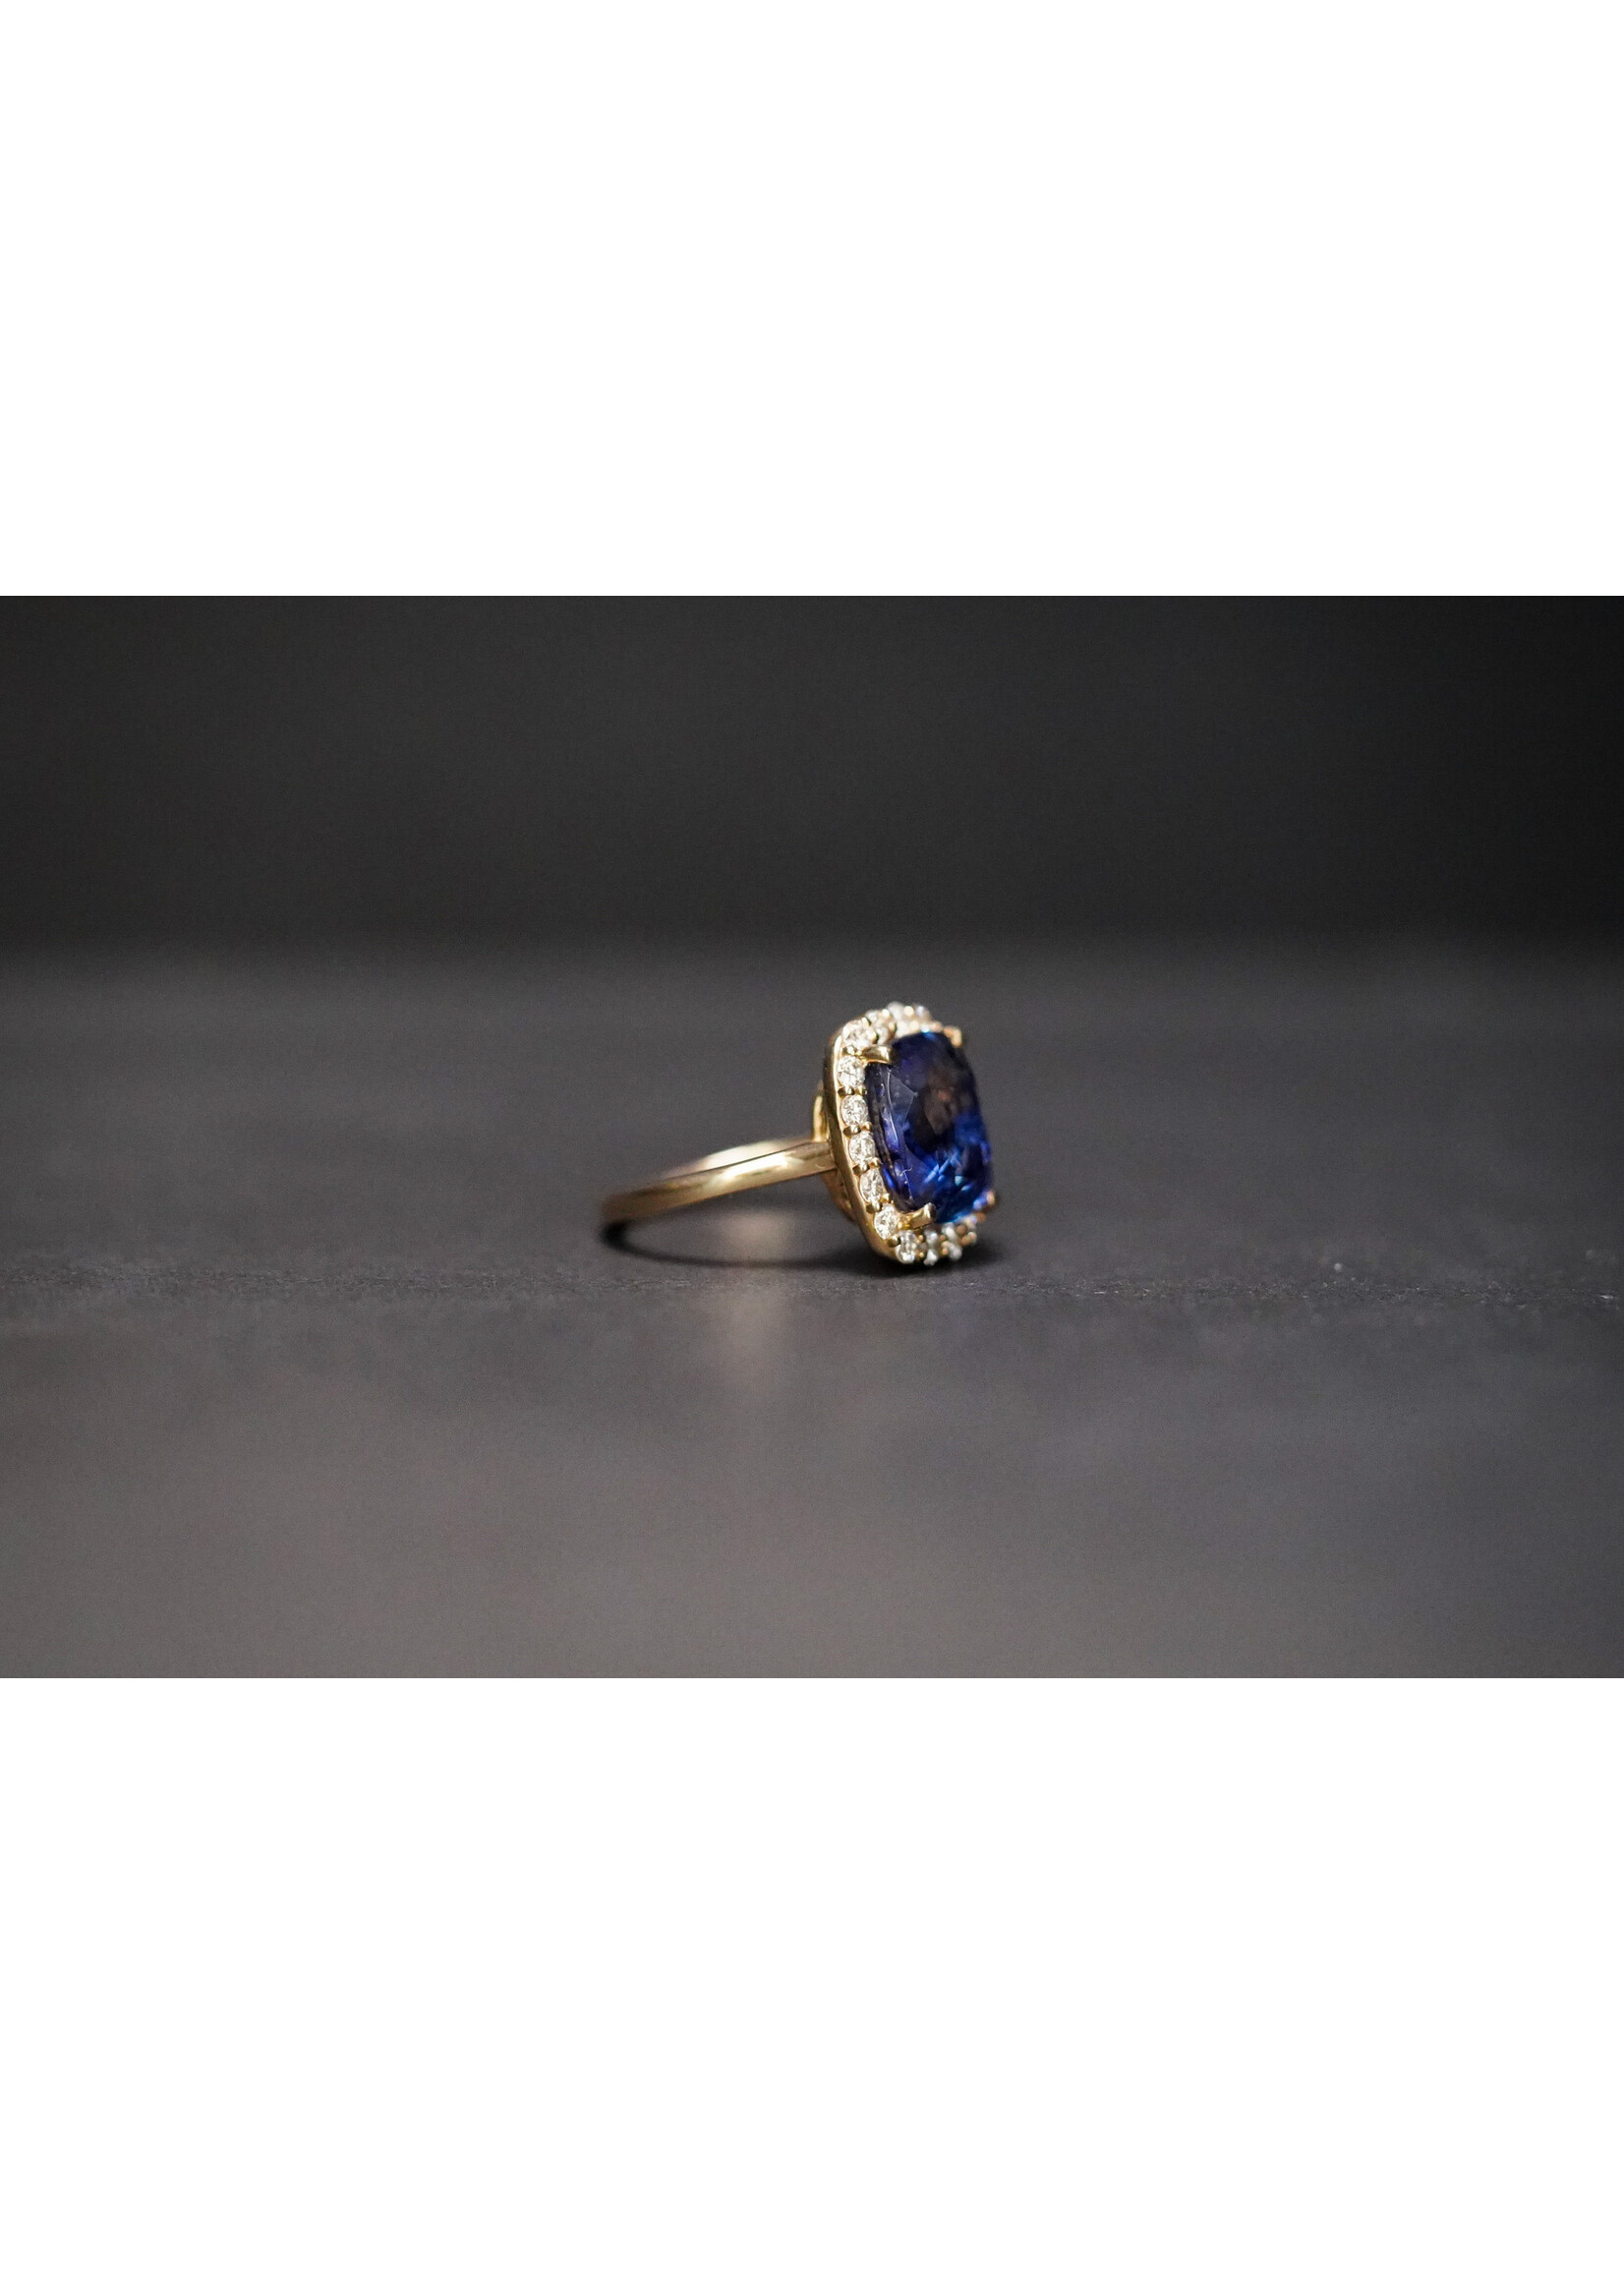 14KY 5.86g 6.43ctw (5.85ctr) Cushion Sapphire Halo Fashion Ring (size 6)